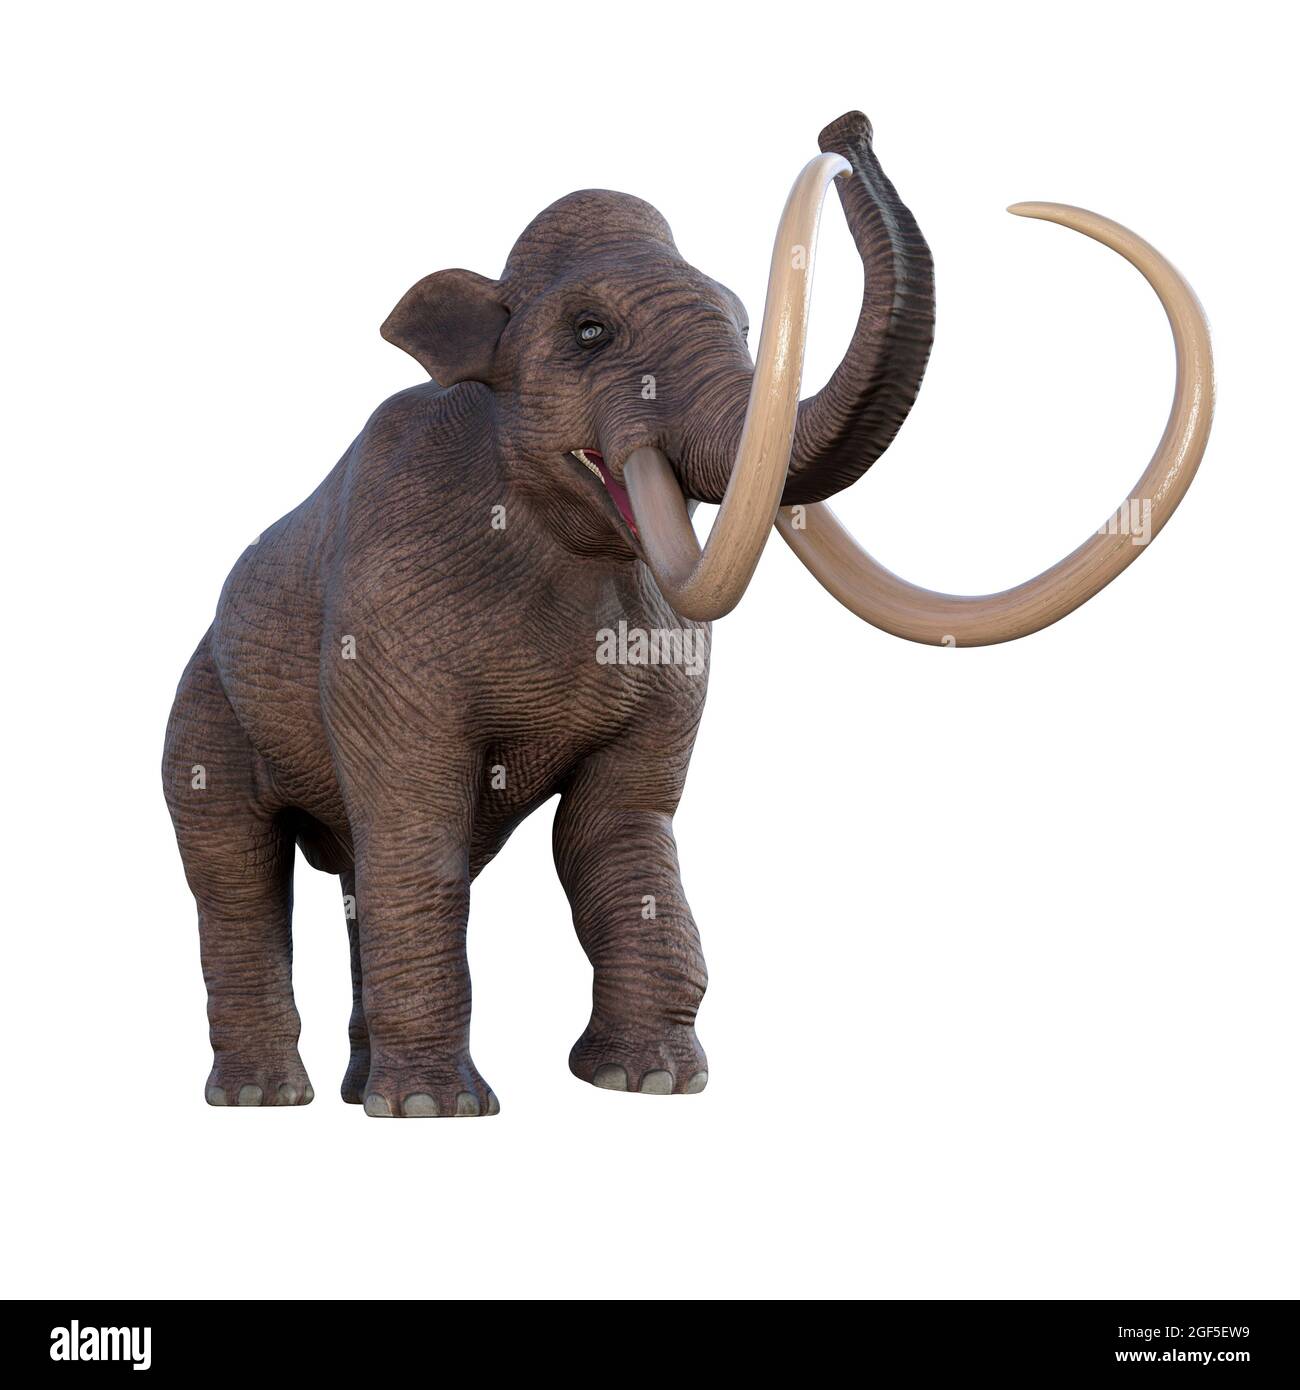 Columbian Mammoth Trumpeting - Columbian Mammoth was an elephant that lived in the Pleistocene Period of North America. Stock Photo